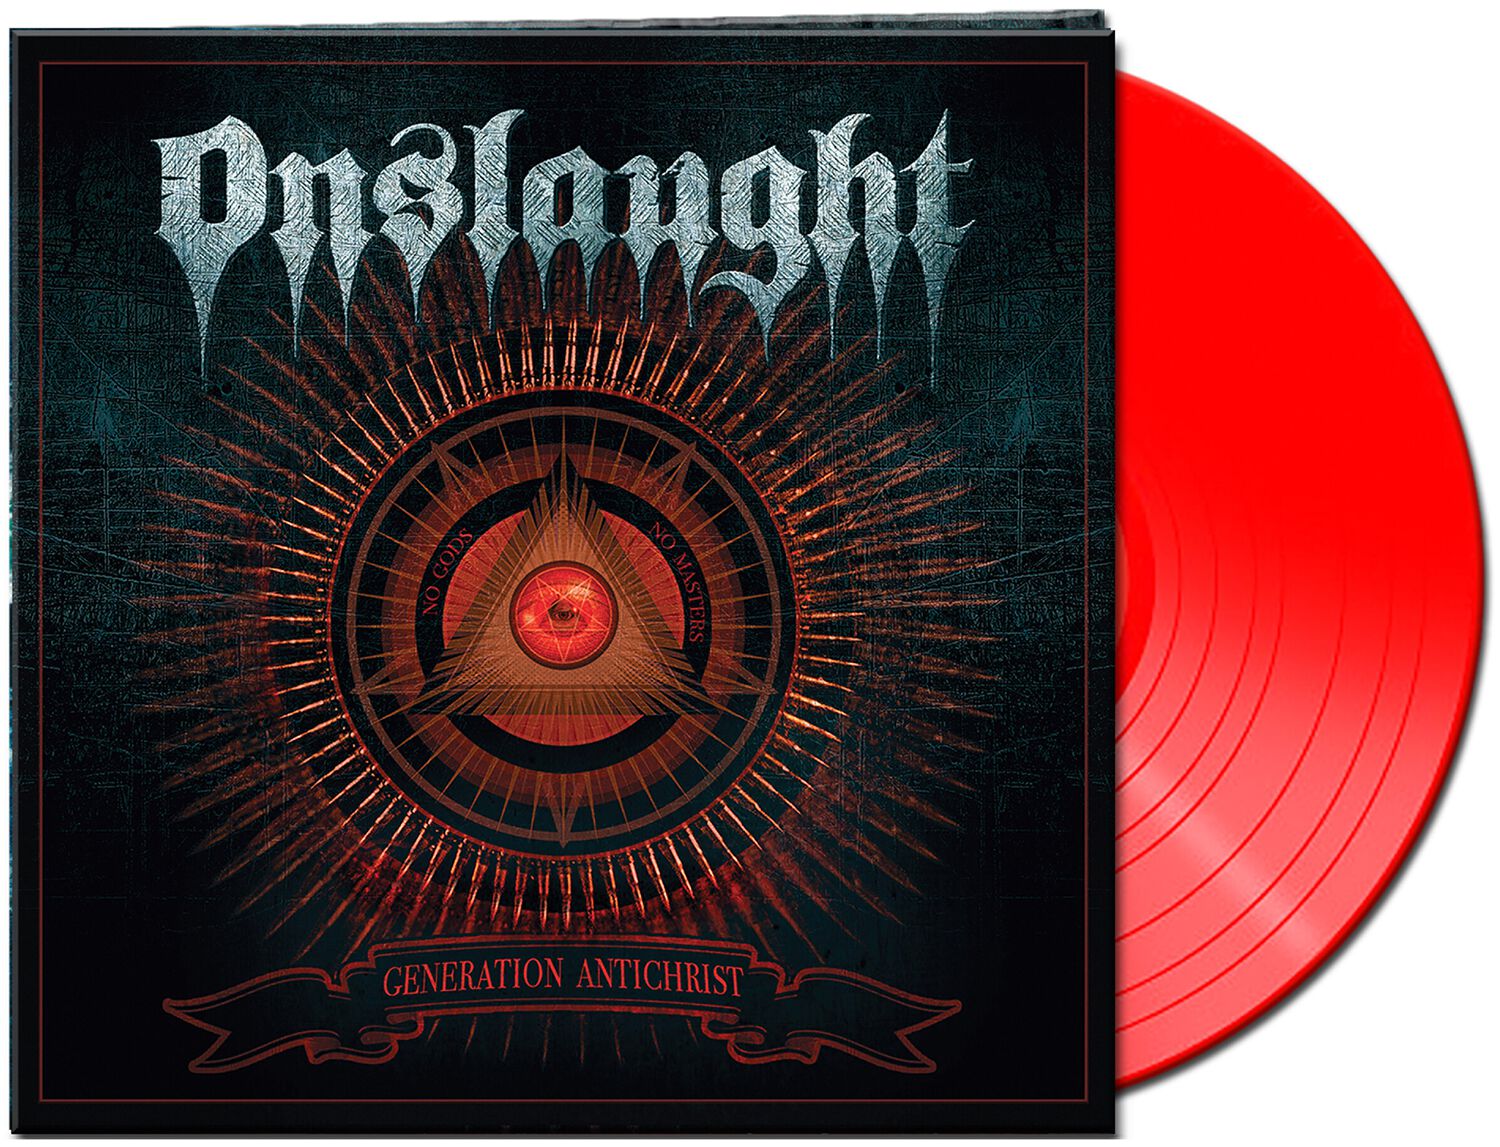 Onslaught Generation Antichrist LP red